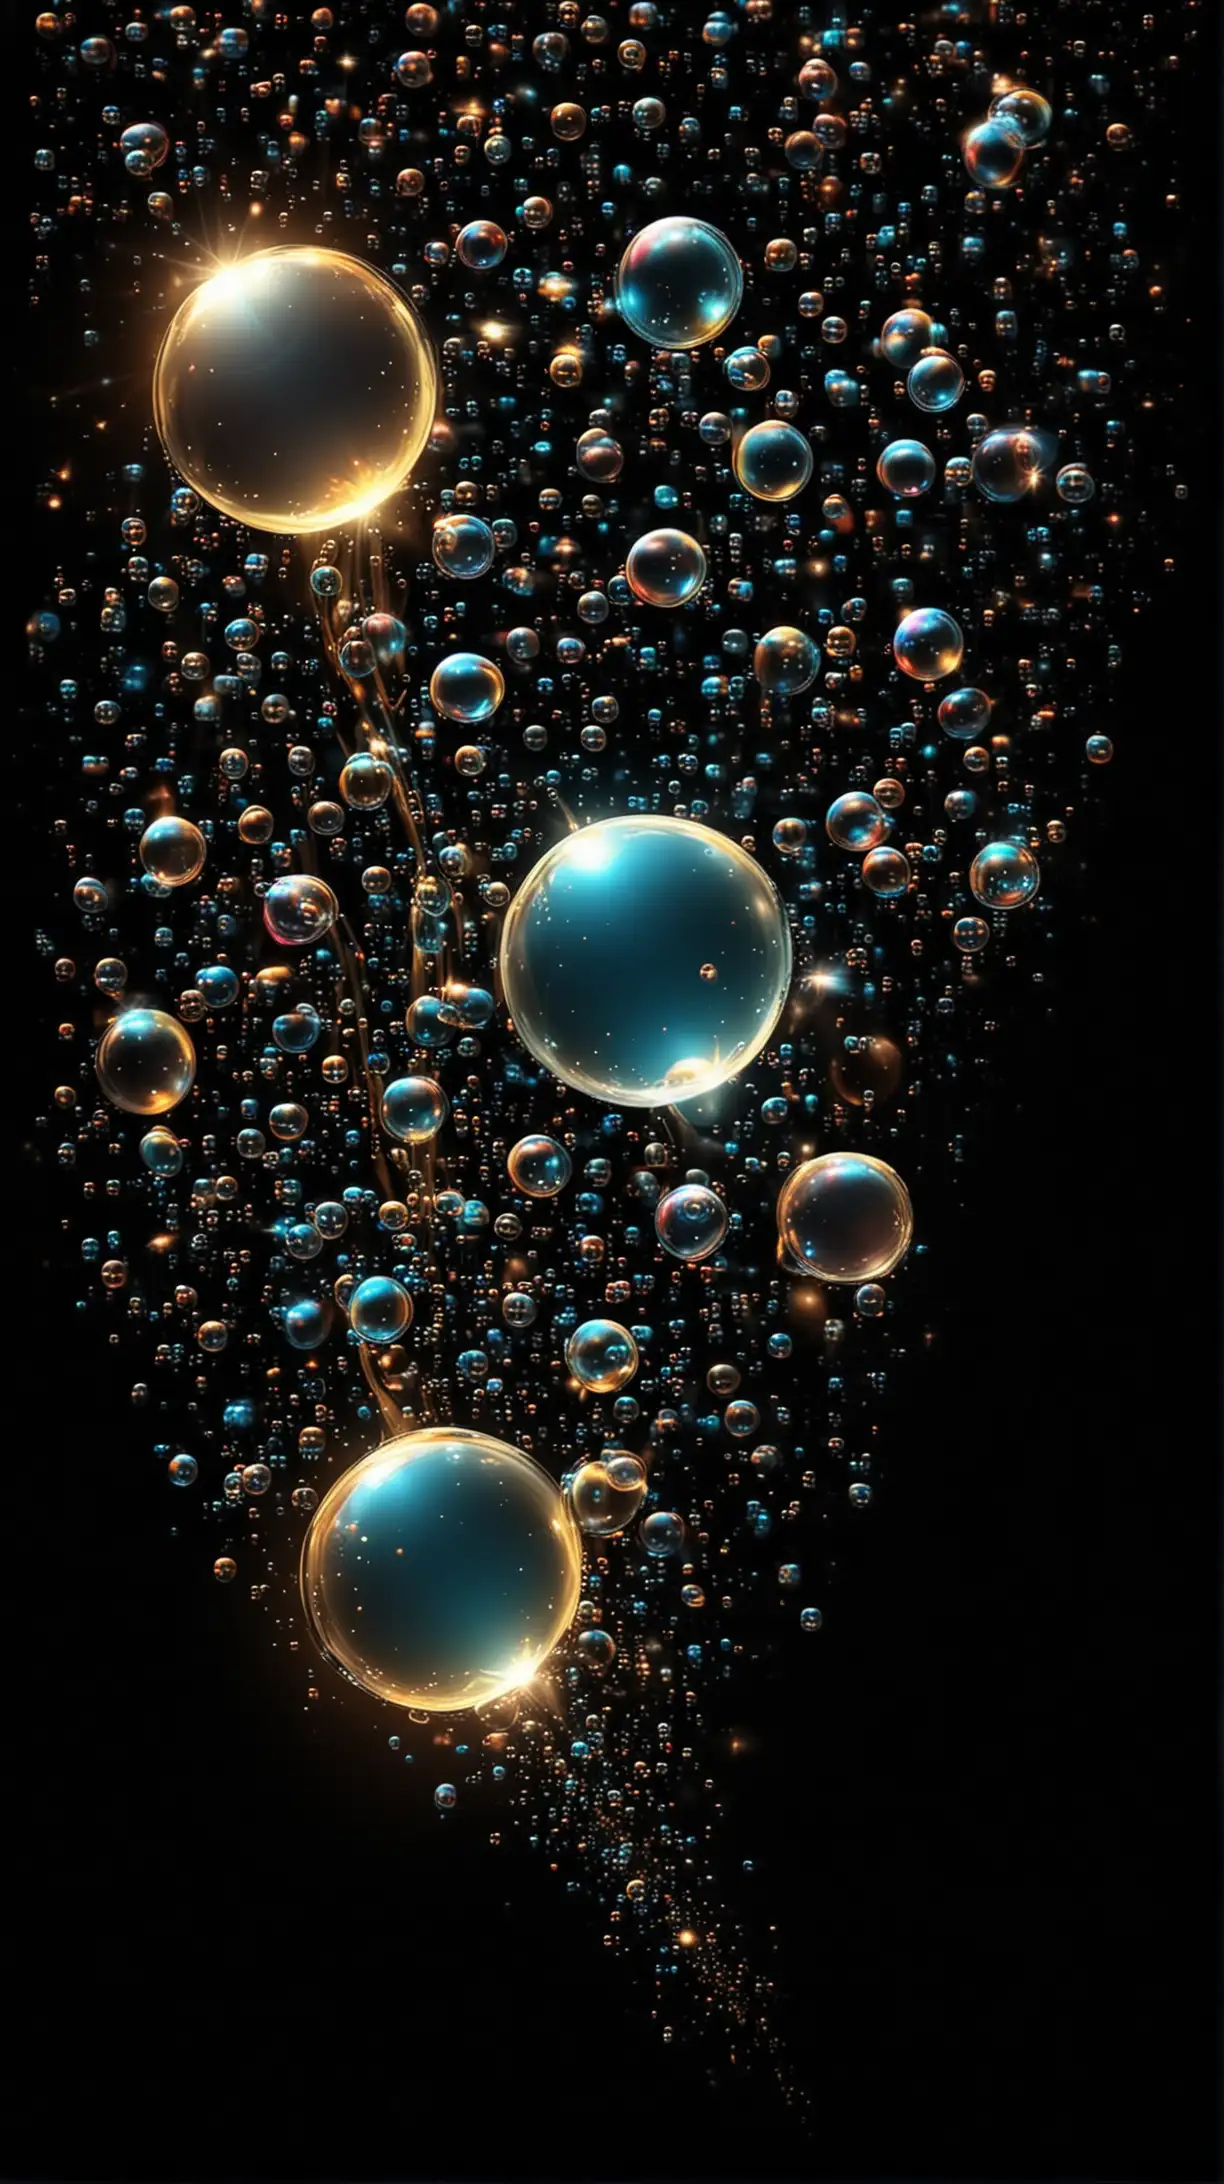 Glowing background with bubbles and stars BUBBLES ISOLATED ON BLACK glowing BACKGROUND